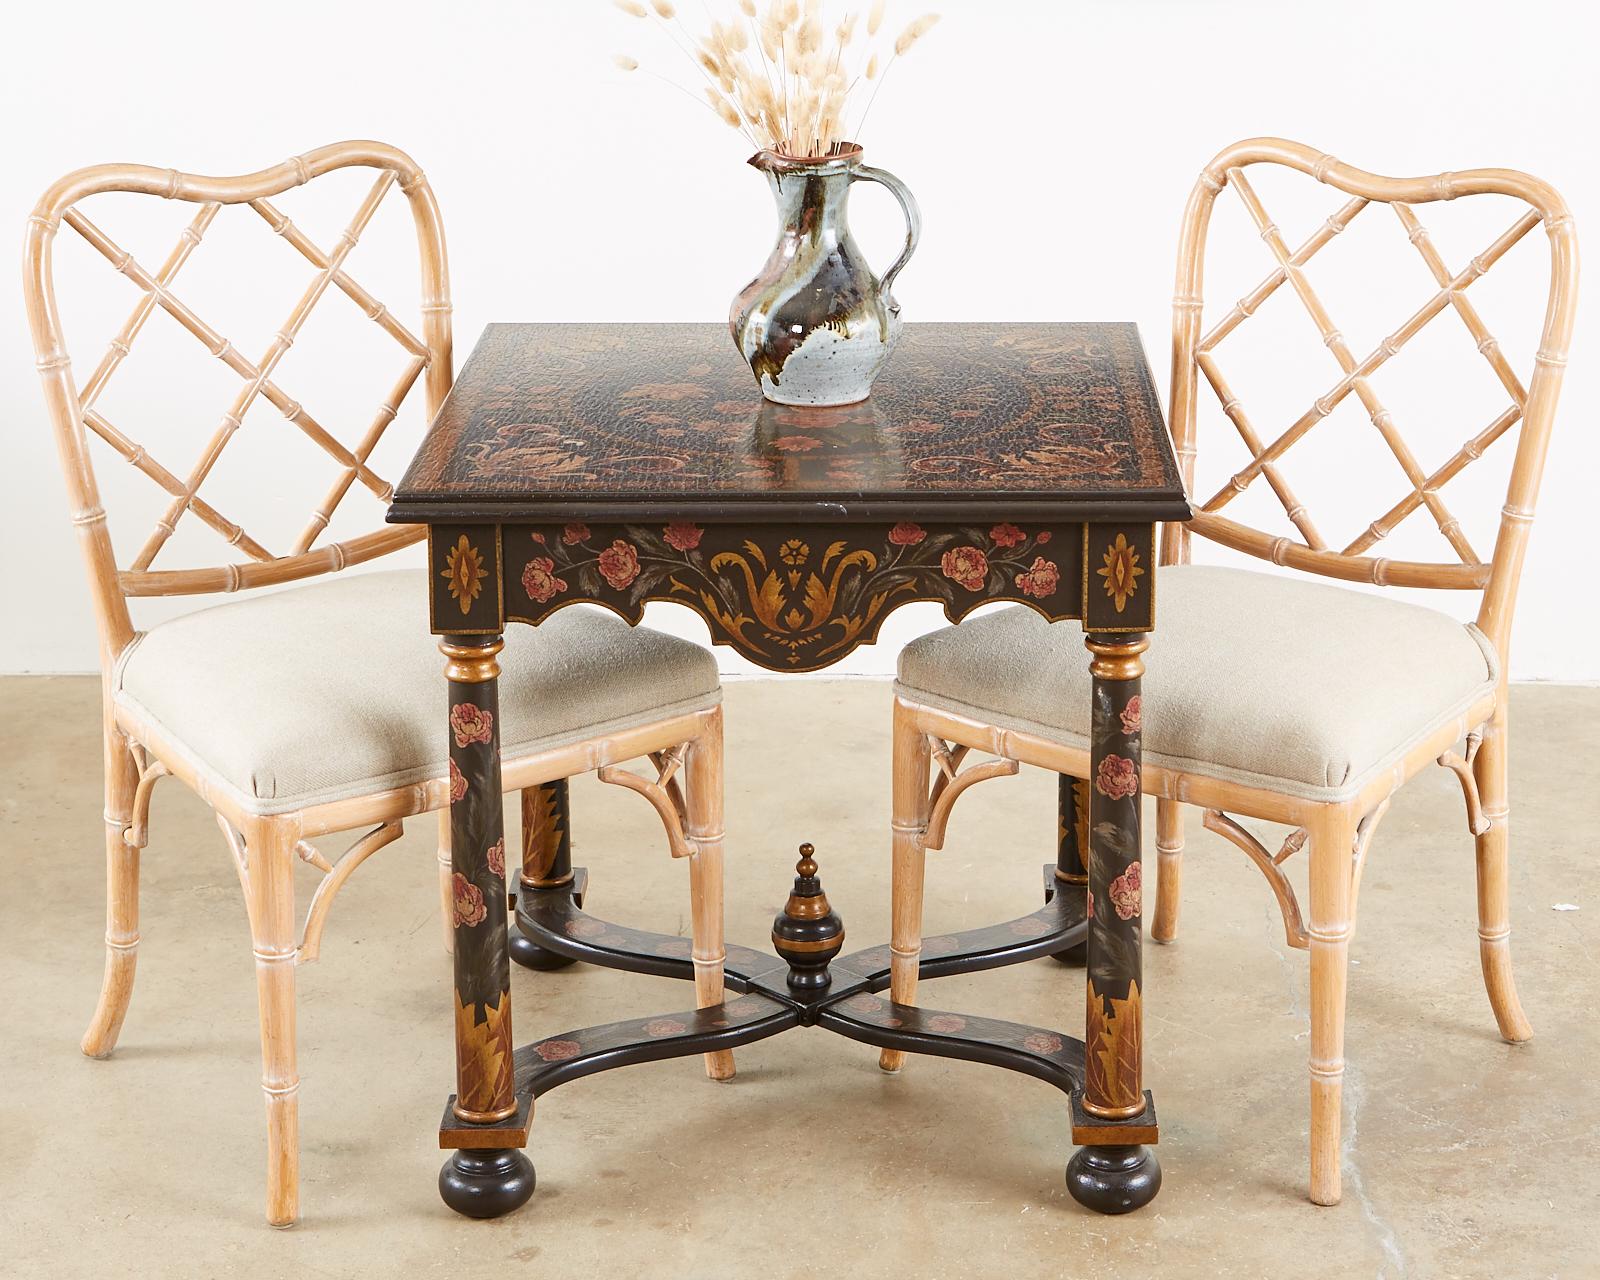 Extraordinary pair of lacquer painted lamp tables or end tables made in the French Louis XIII taste. Decorated with colorful floral motifs and faux aged craquelure lacquer finish. Supported by column style legs conjoined with curved x form